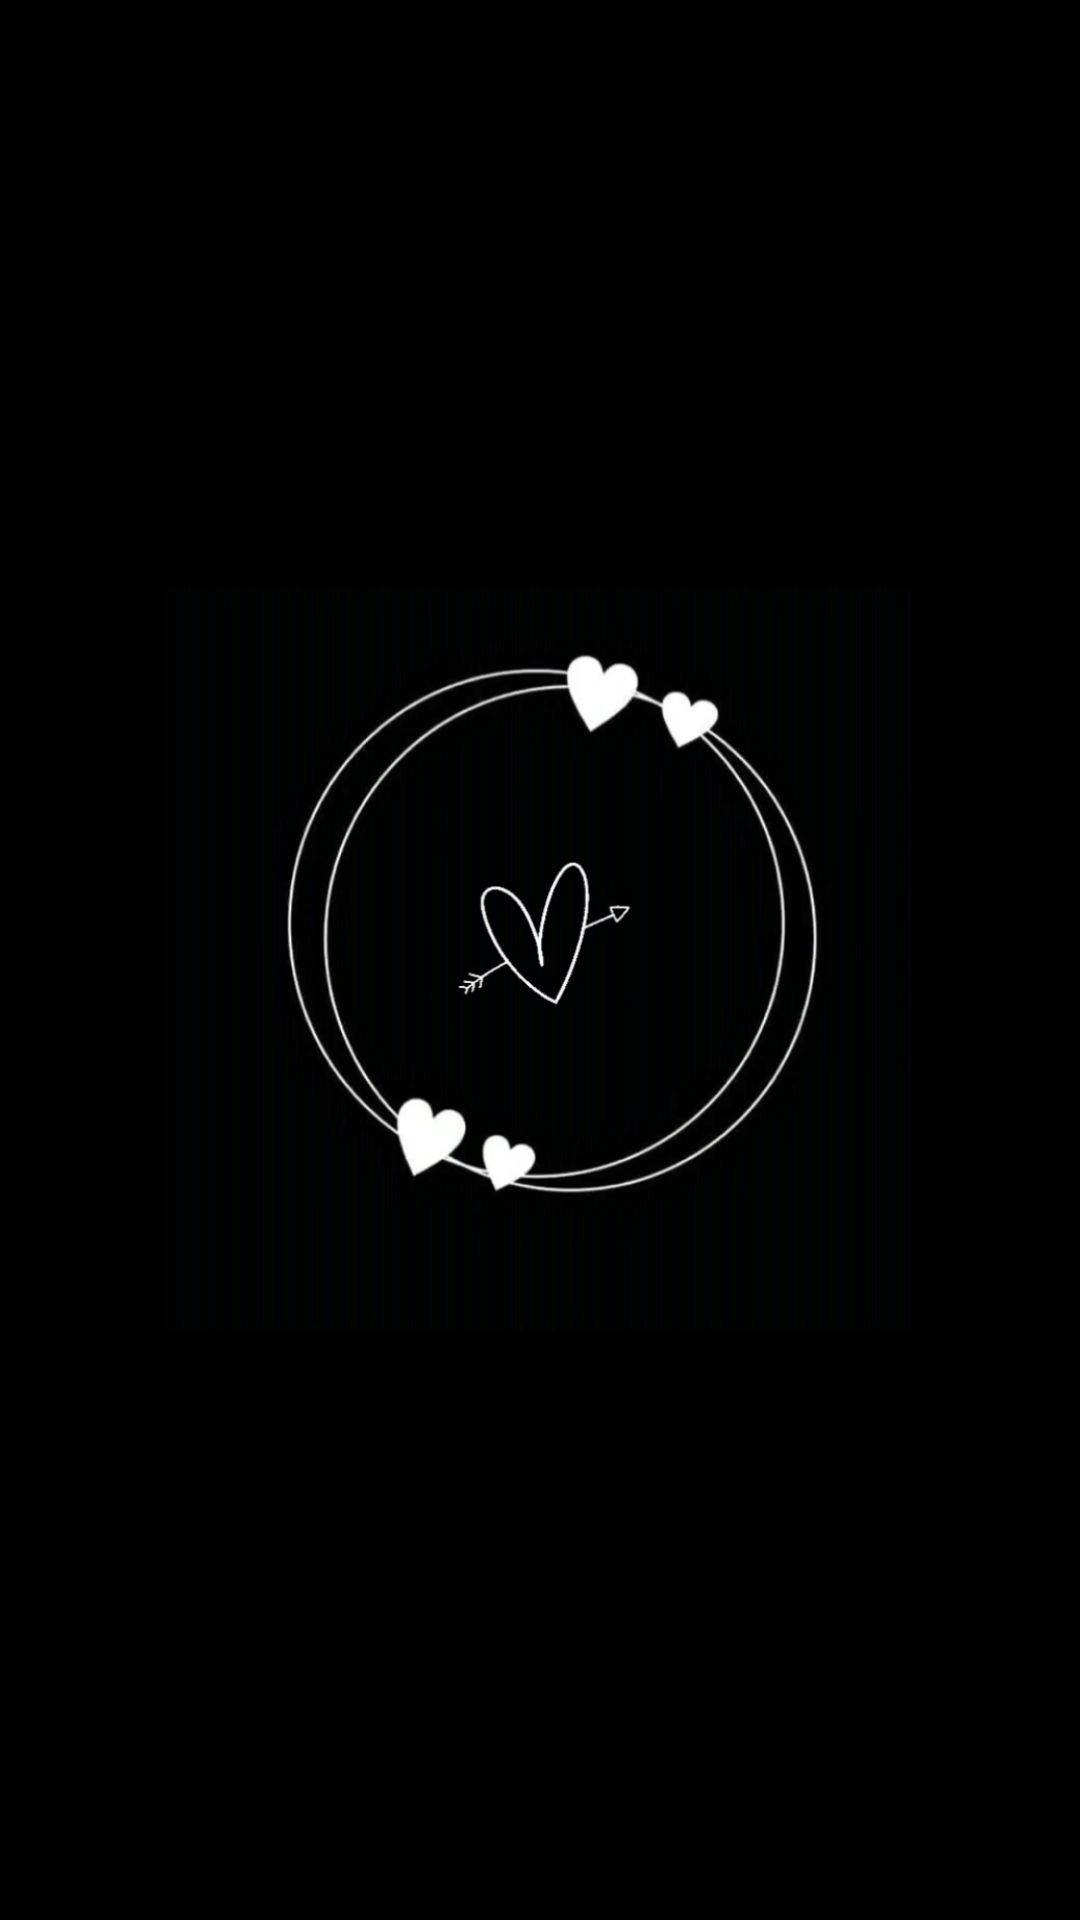 Black Heart With Hearts Around Background